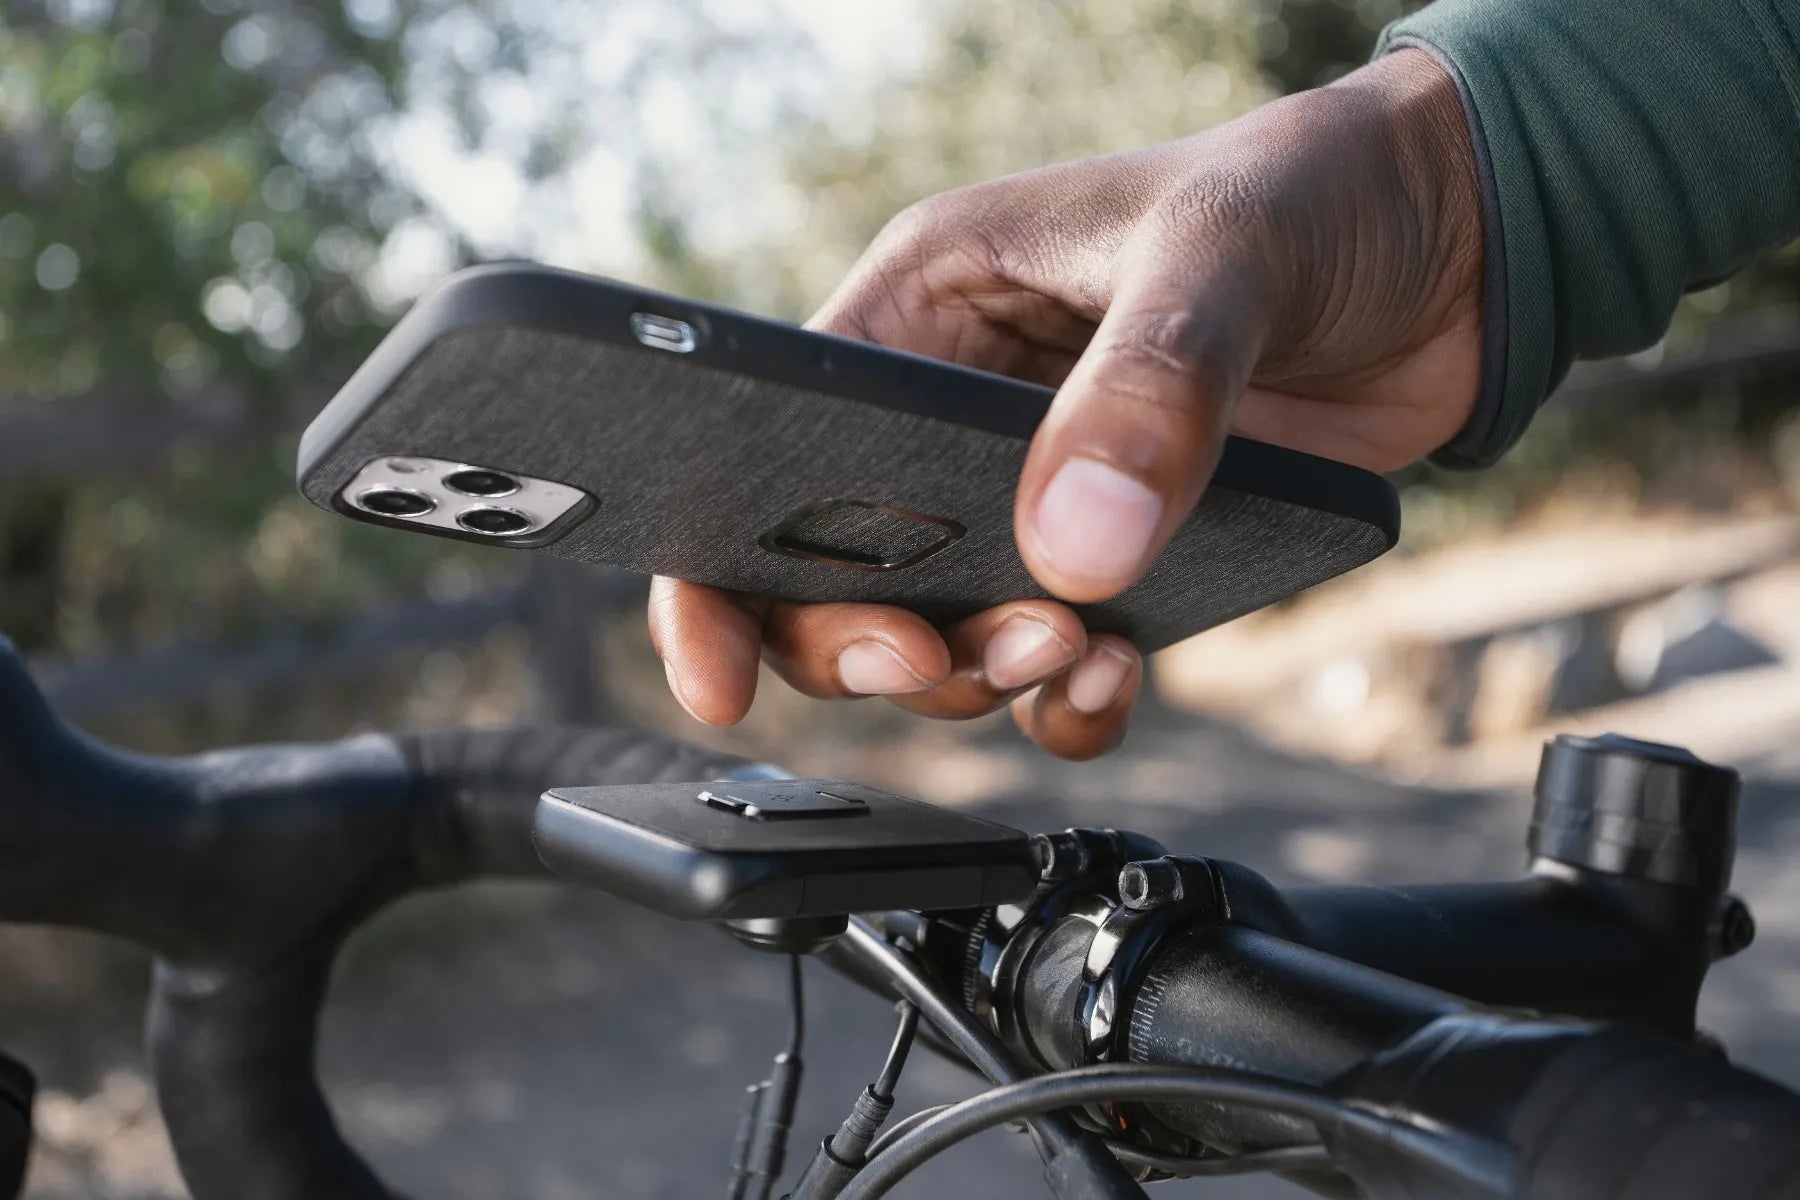 Peak Design Mobile - Everyday Fabric Case - Iphone 11 - Charcoal PHONE & DEVICE MOUNTS Melbourne Powered Electric Bikes 